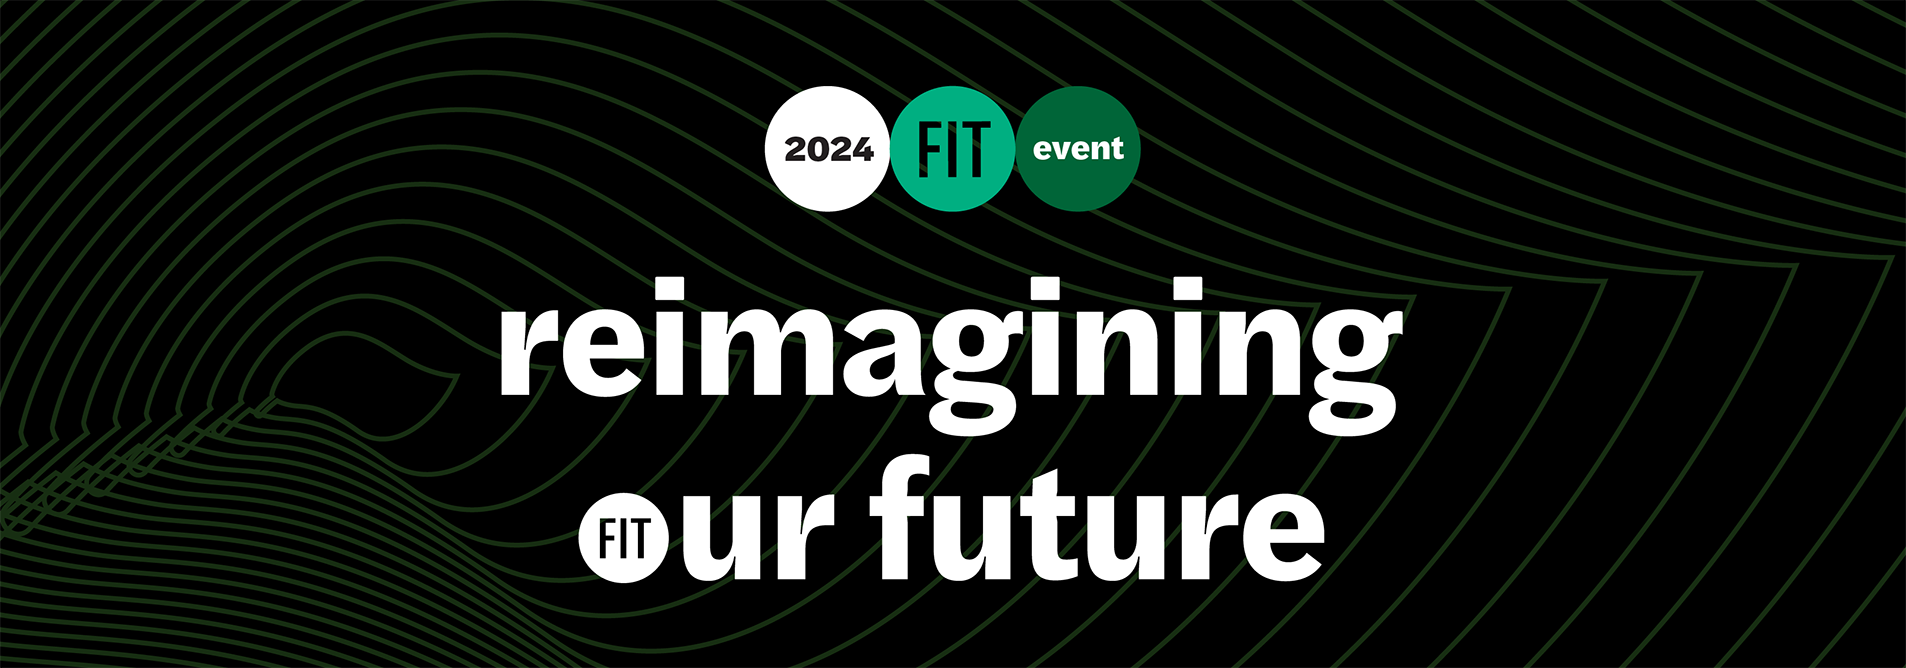 2024 Sustainability Conference banner: Reimagining Our Future